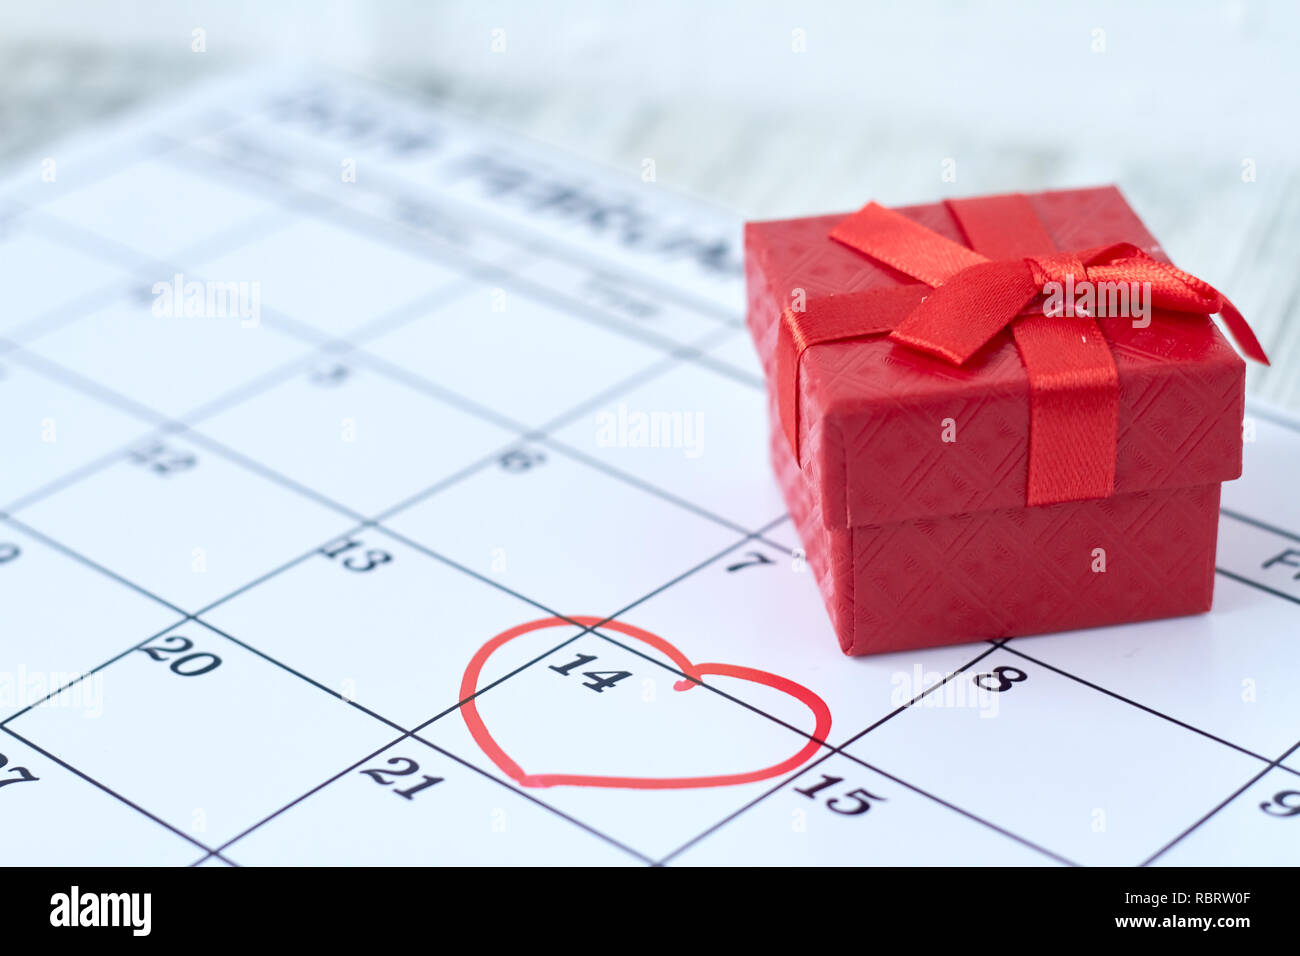 Red gift box in February for Valentine's day. Top view of the calendar. Date marked. Stock Photo